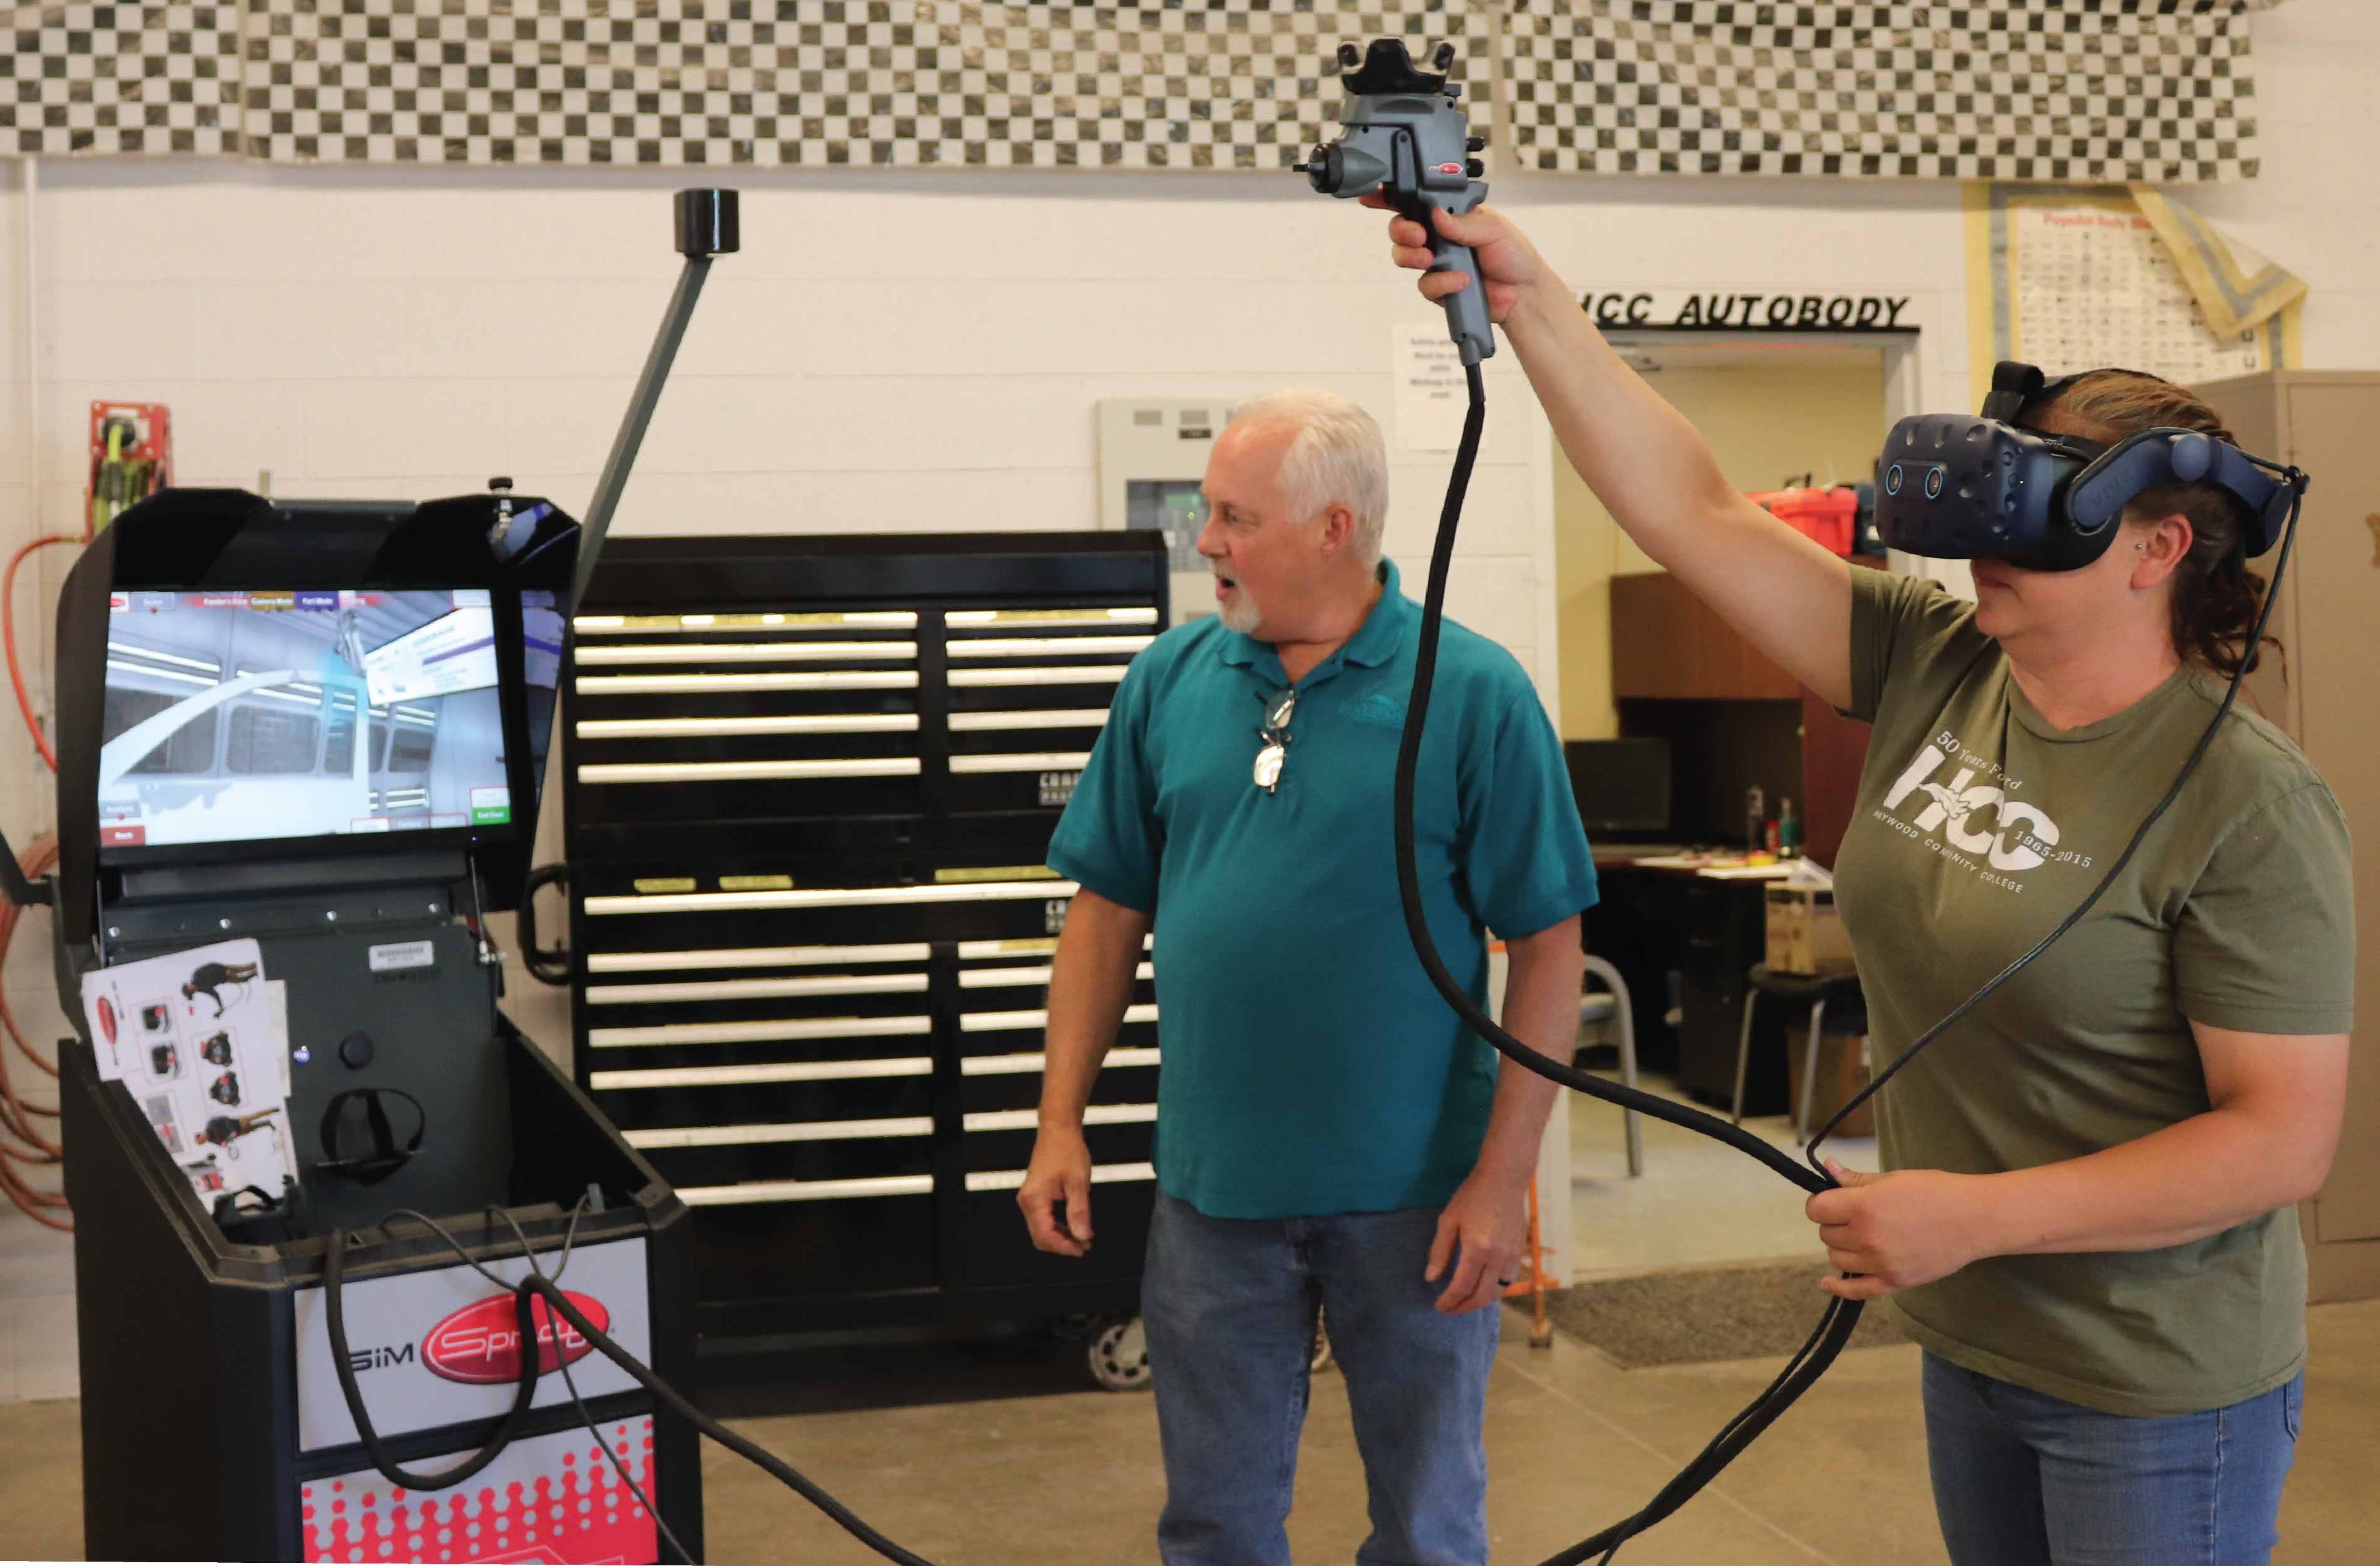 HCC’s Collision & Repair program received a Sim Spray, a machine that allows users to paint car parts virtually. Pictured left to right are instructors Mark Hicks and Heather Patterson demonstrating. 